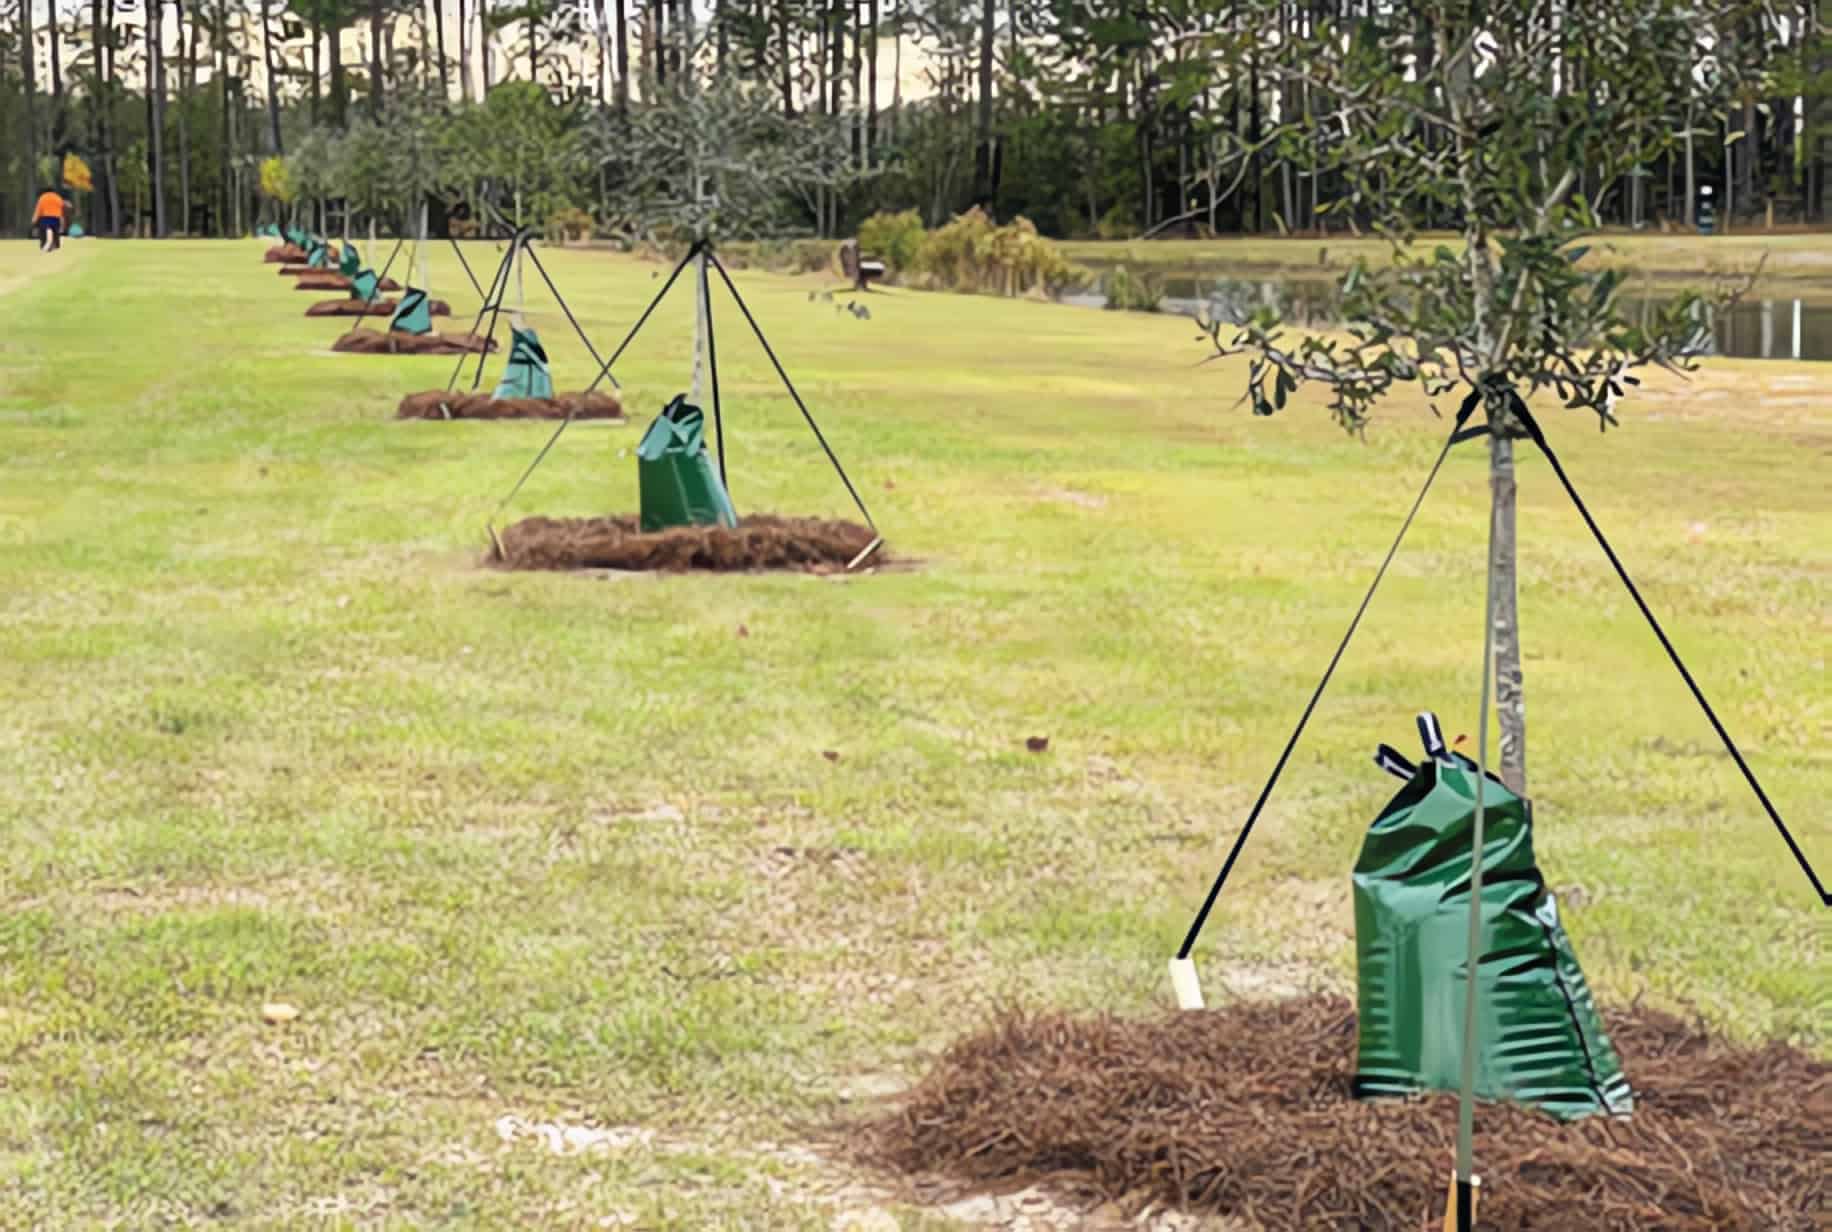 A row of newly planted trees with volunteers in the background